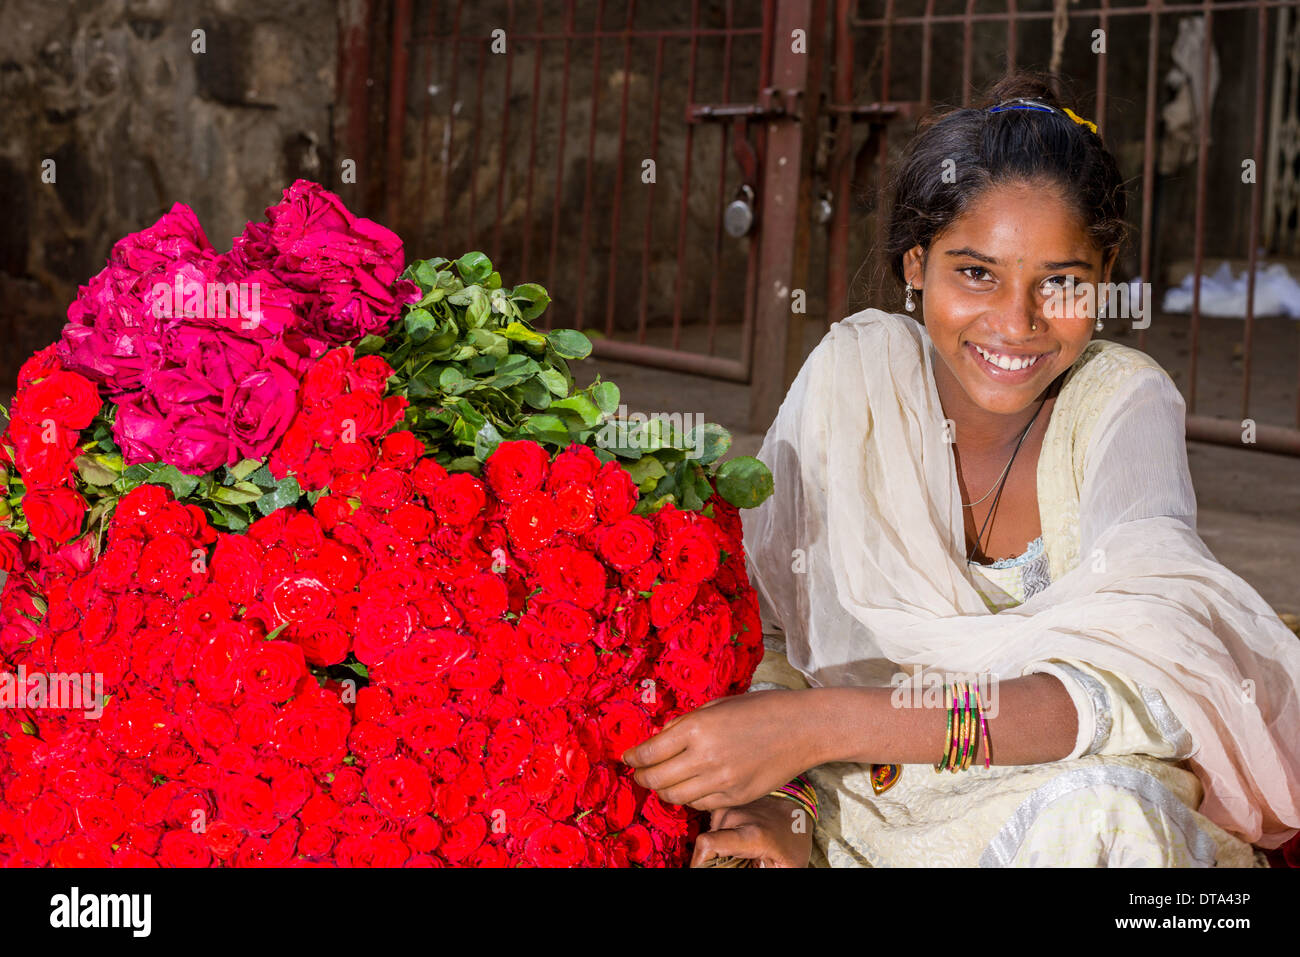 A smiling young woman in a white sari is selling red roses at the weekly market, Nasik, Maharashtra, India Stock Photo